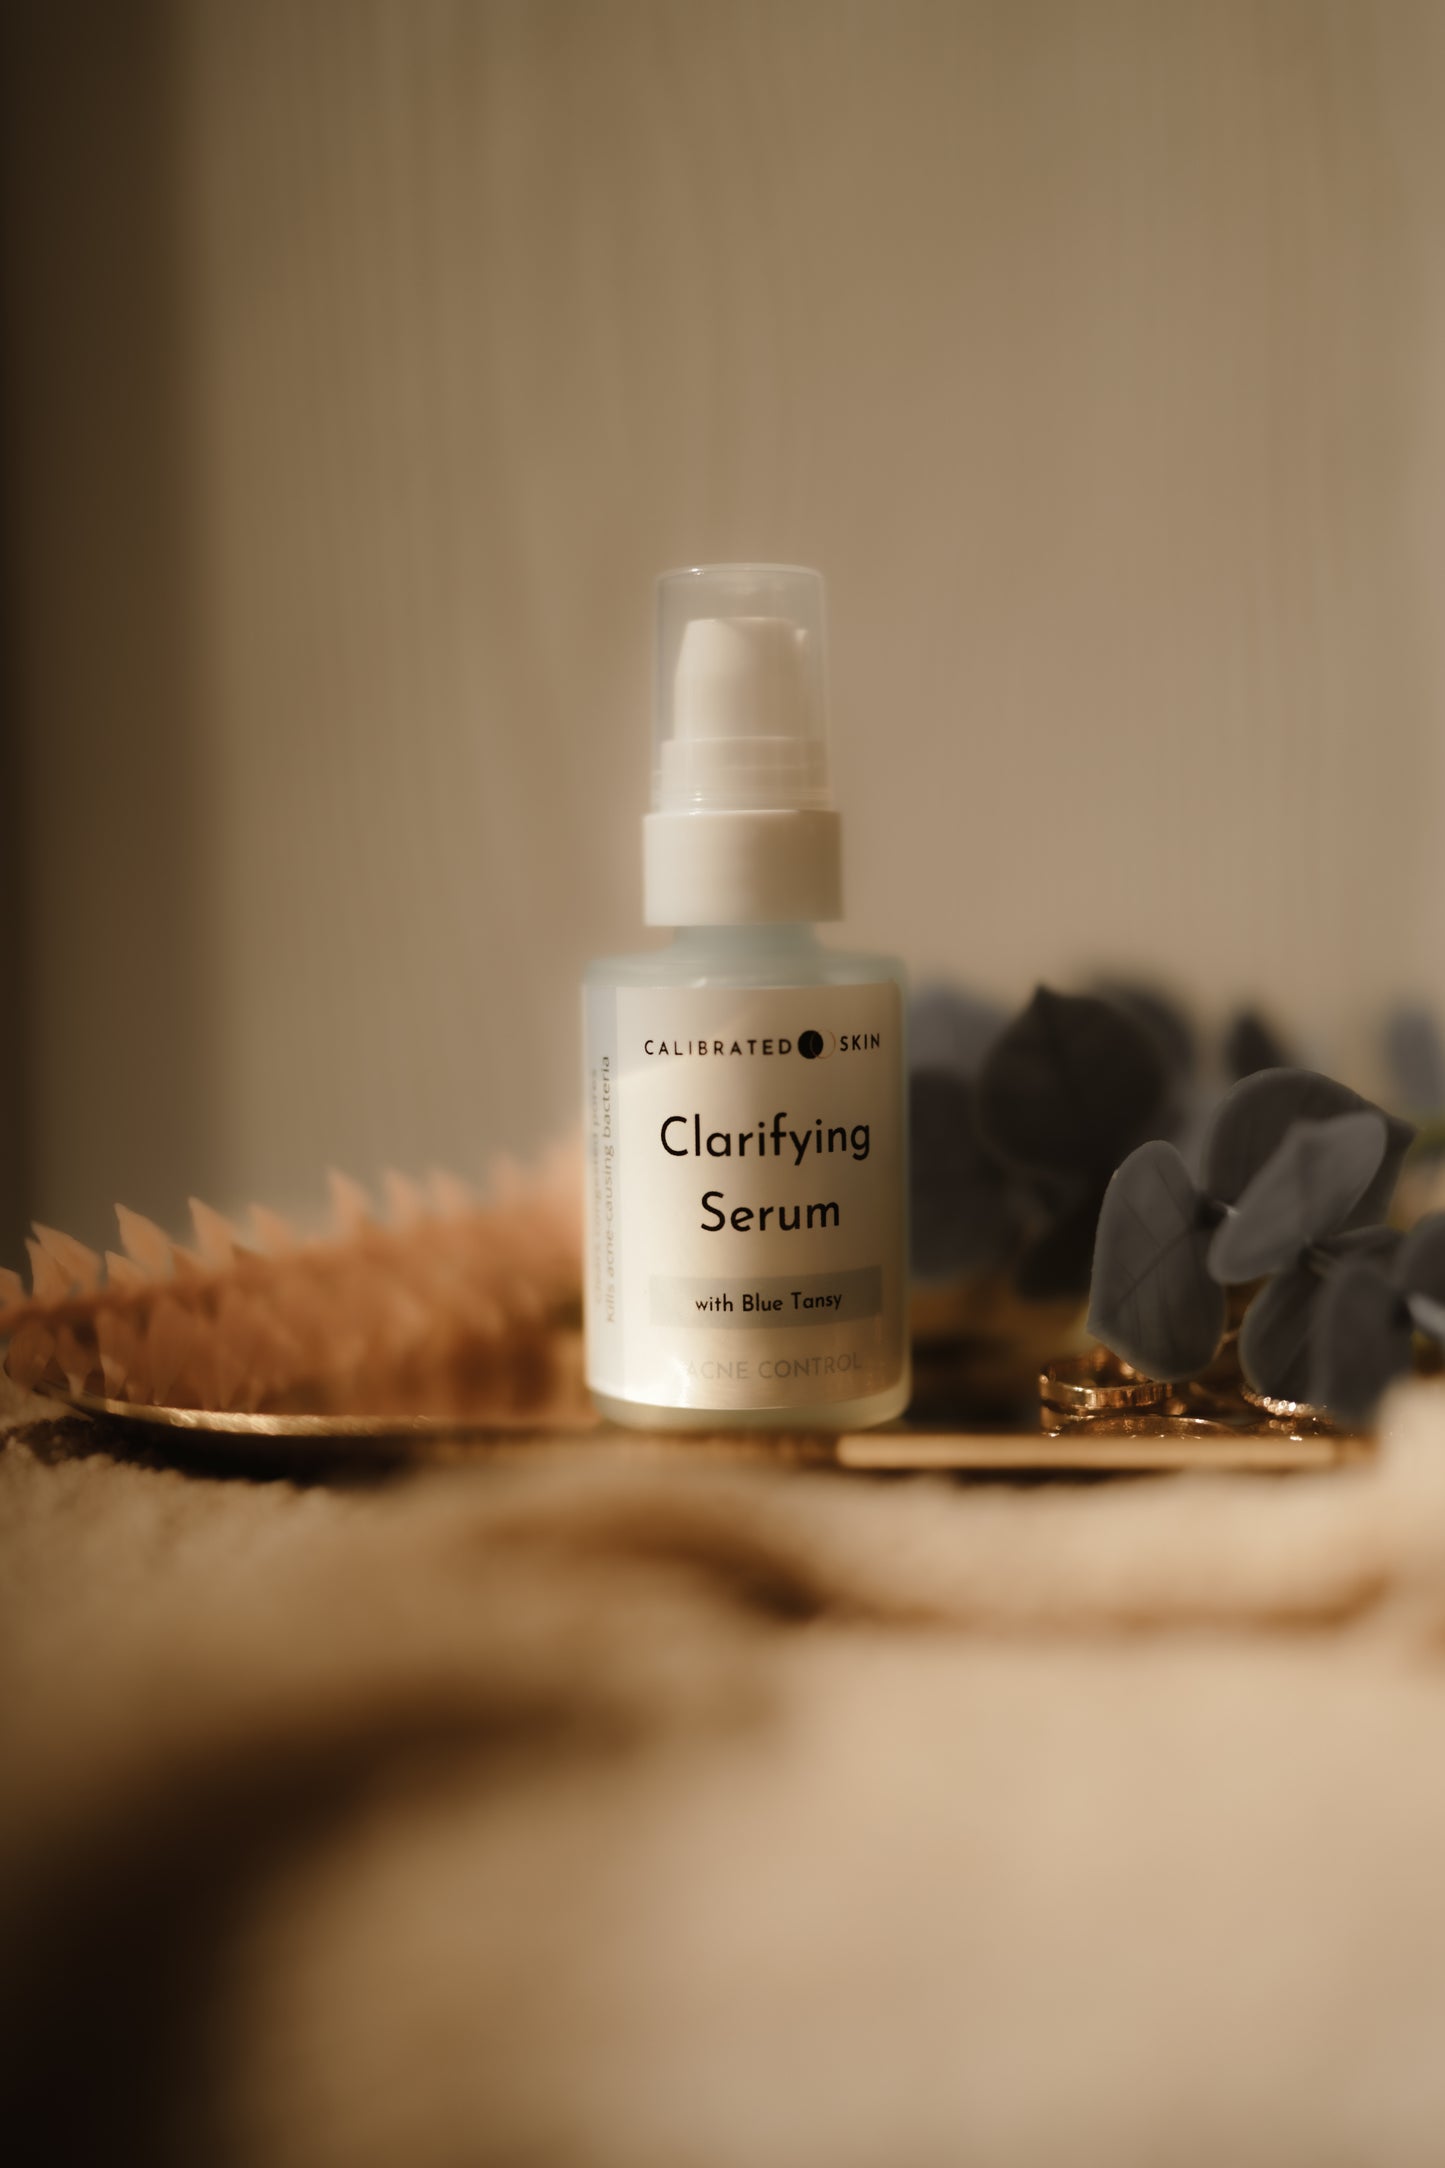 Clarifying Serum - targets congested pores, and kills acne causing bacteria